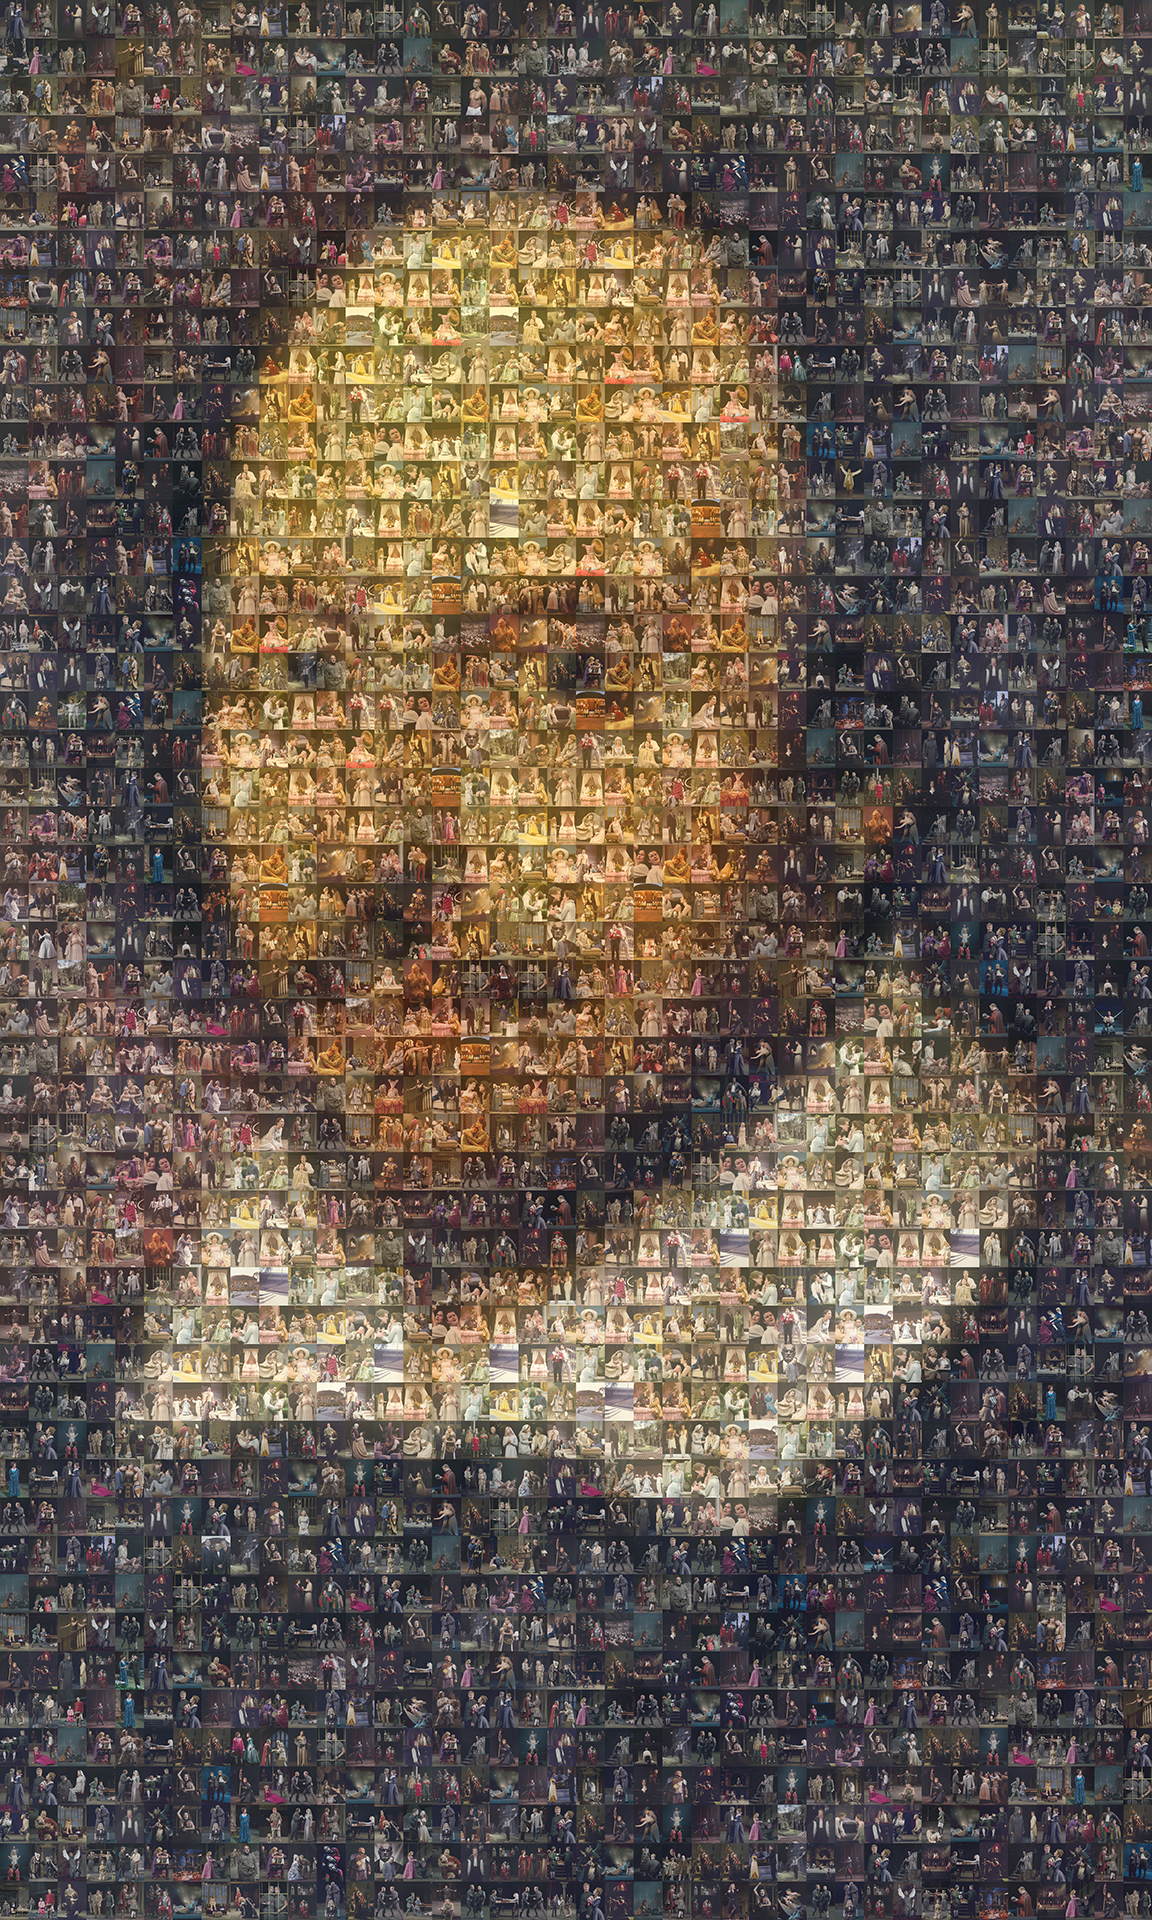 photo mosaic created using 340 photos taken during the different Shakespeare's plays to be used a playbill cover